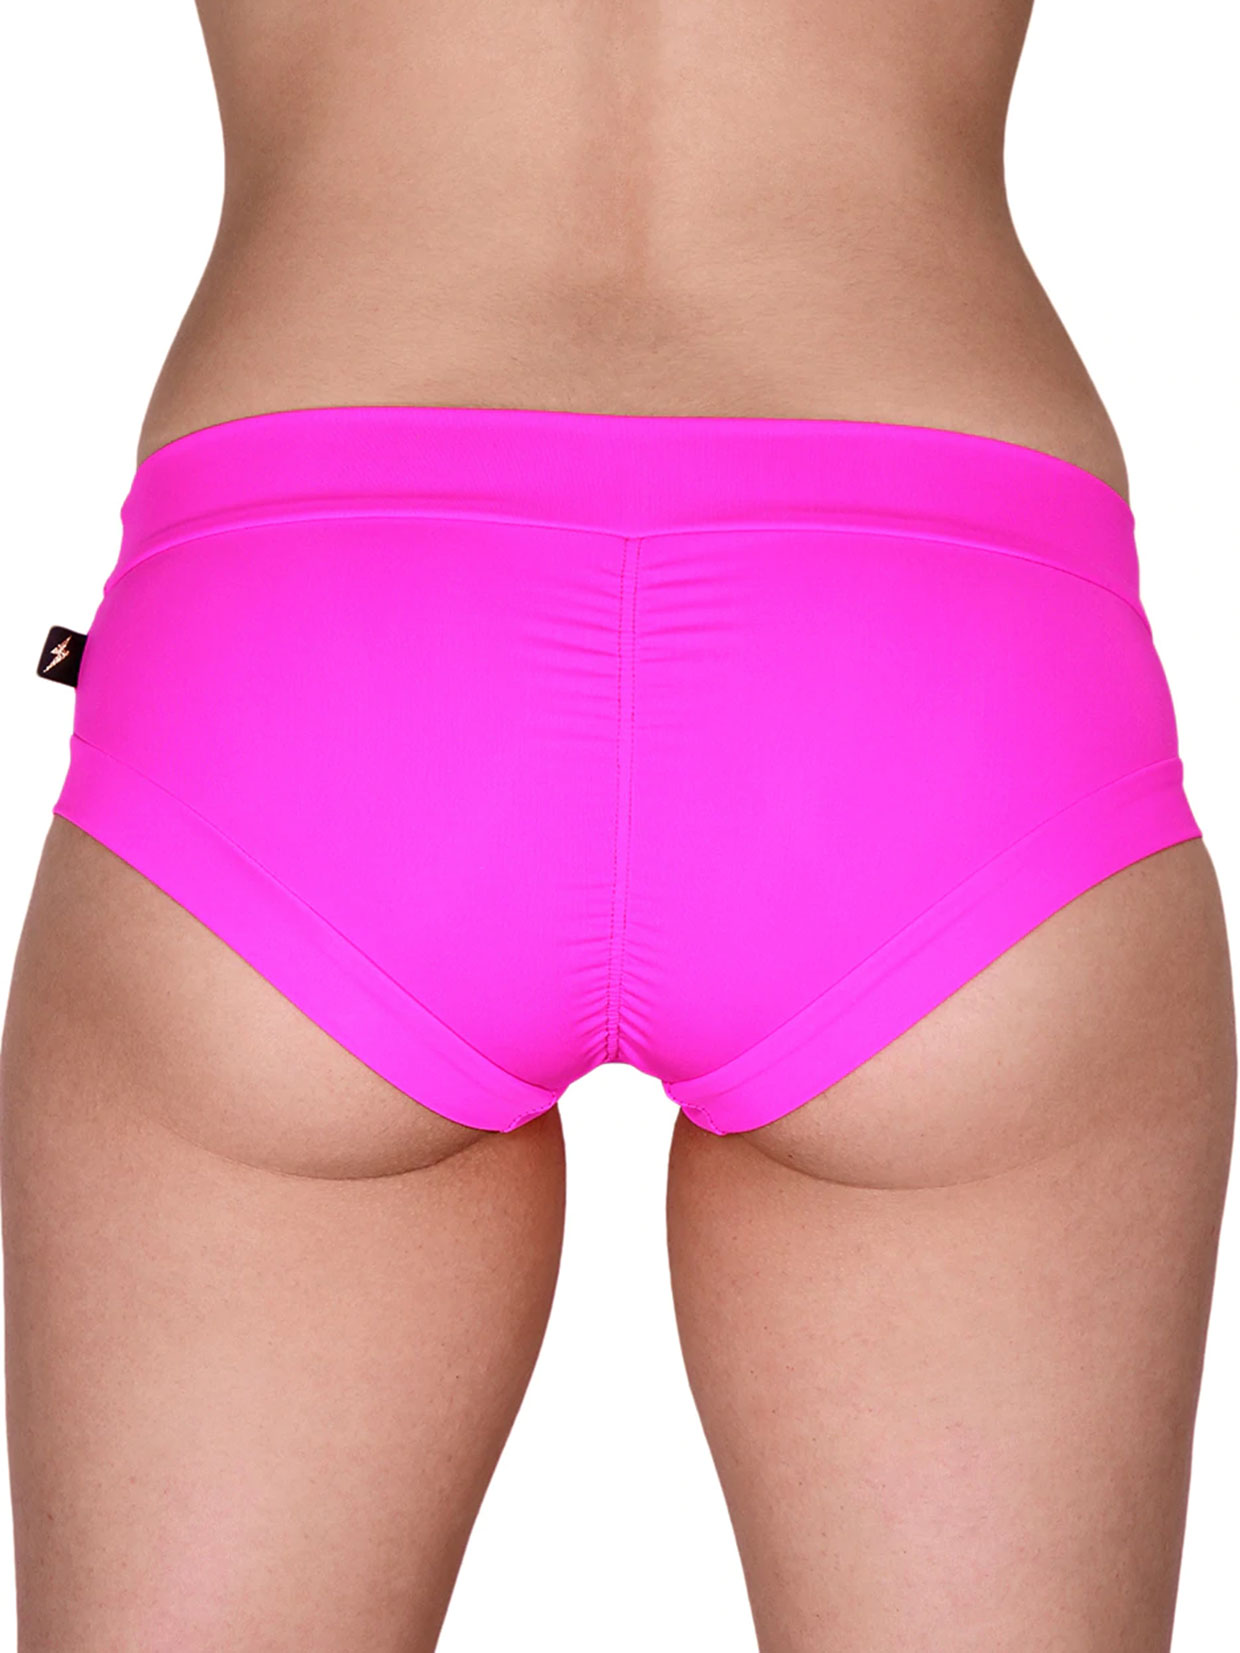 Cleo The Hurricane Essential Hot Pants - Hot Pink - We Are Breathe